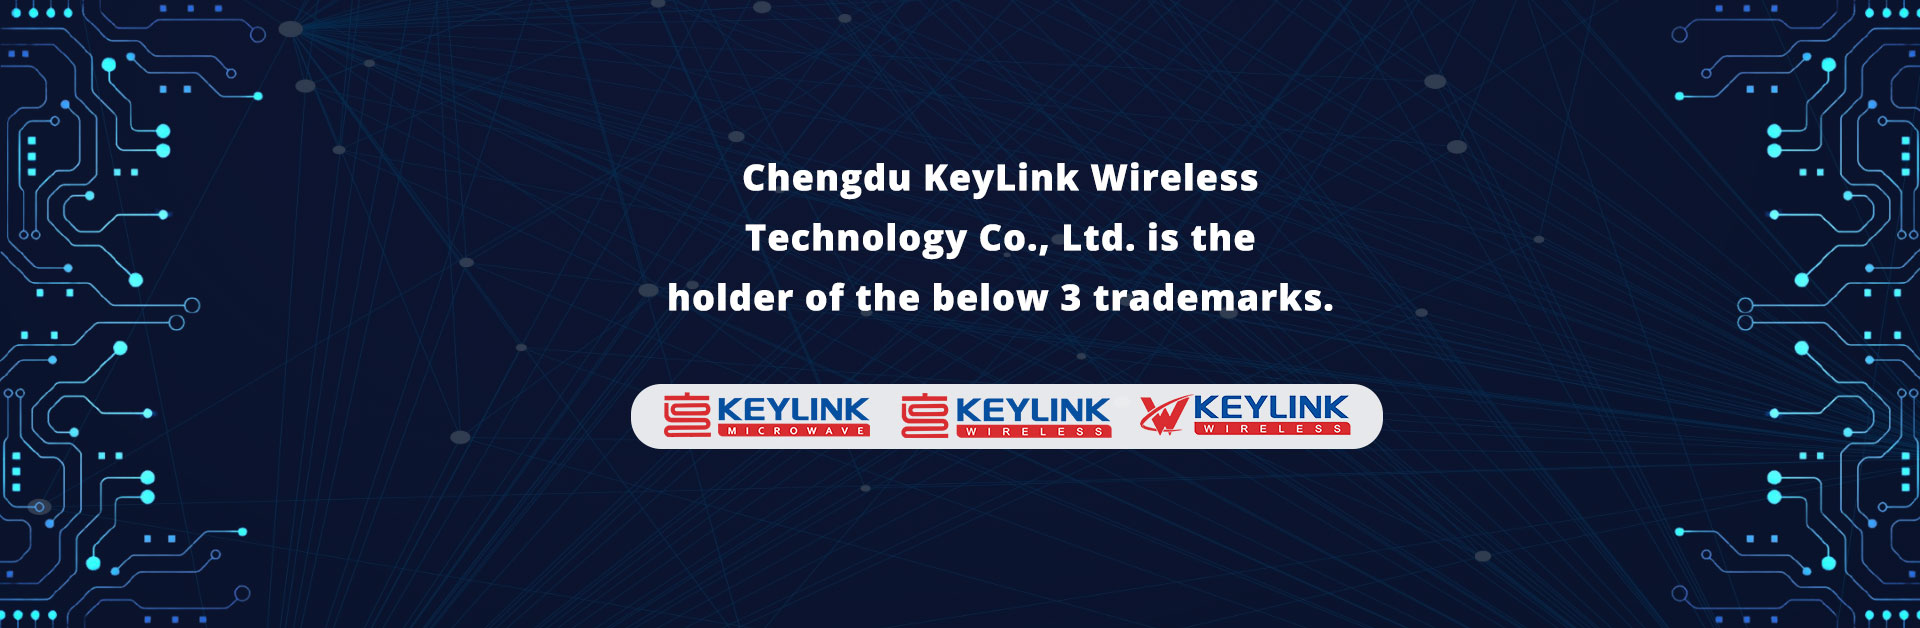 Chengdu KeyLink Wireless Technology Co., Ltd. is the holder of the above 3 trademarks.